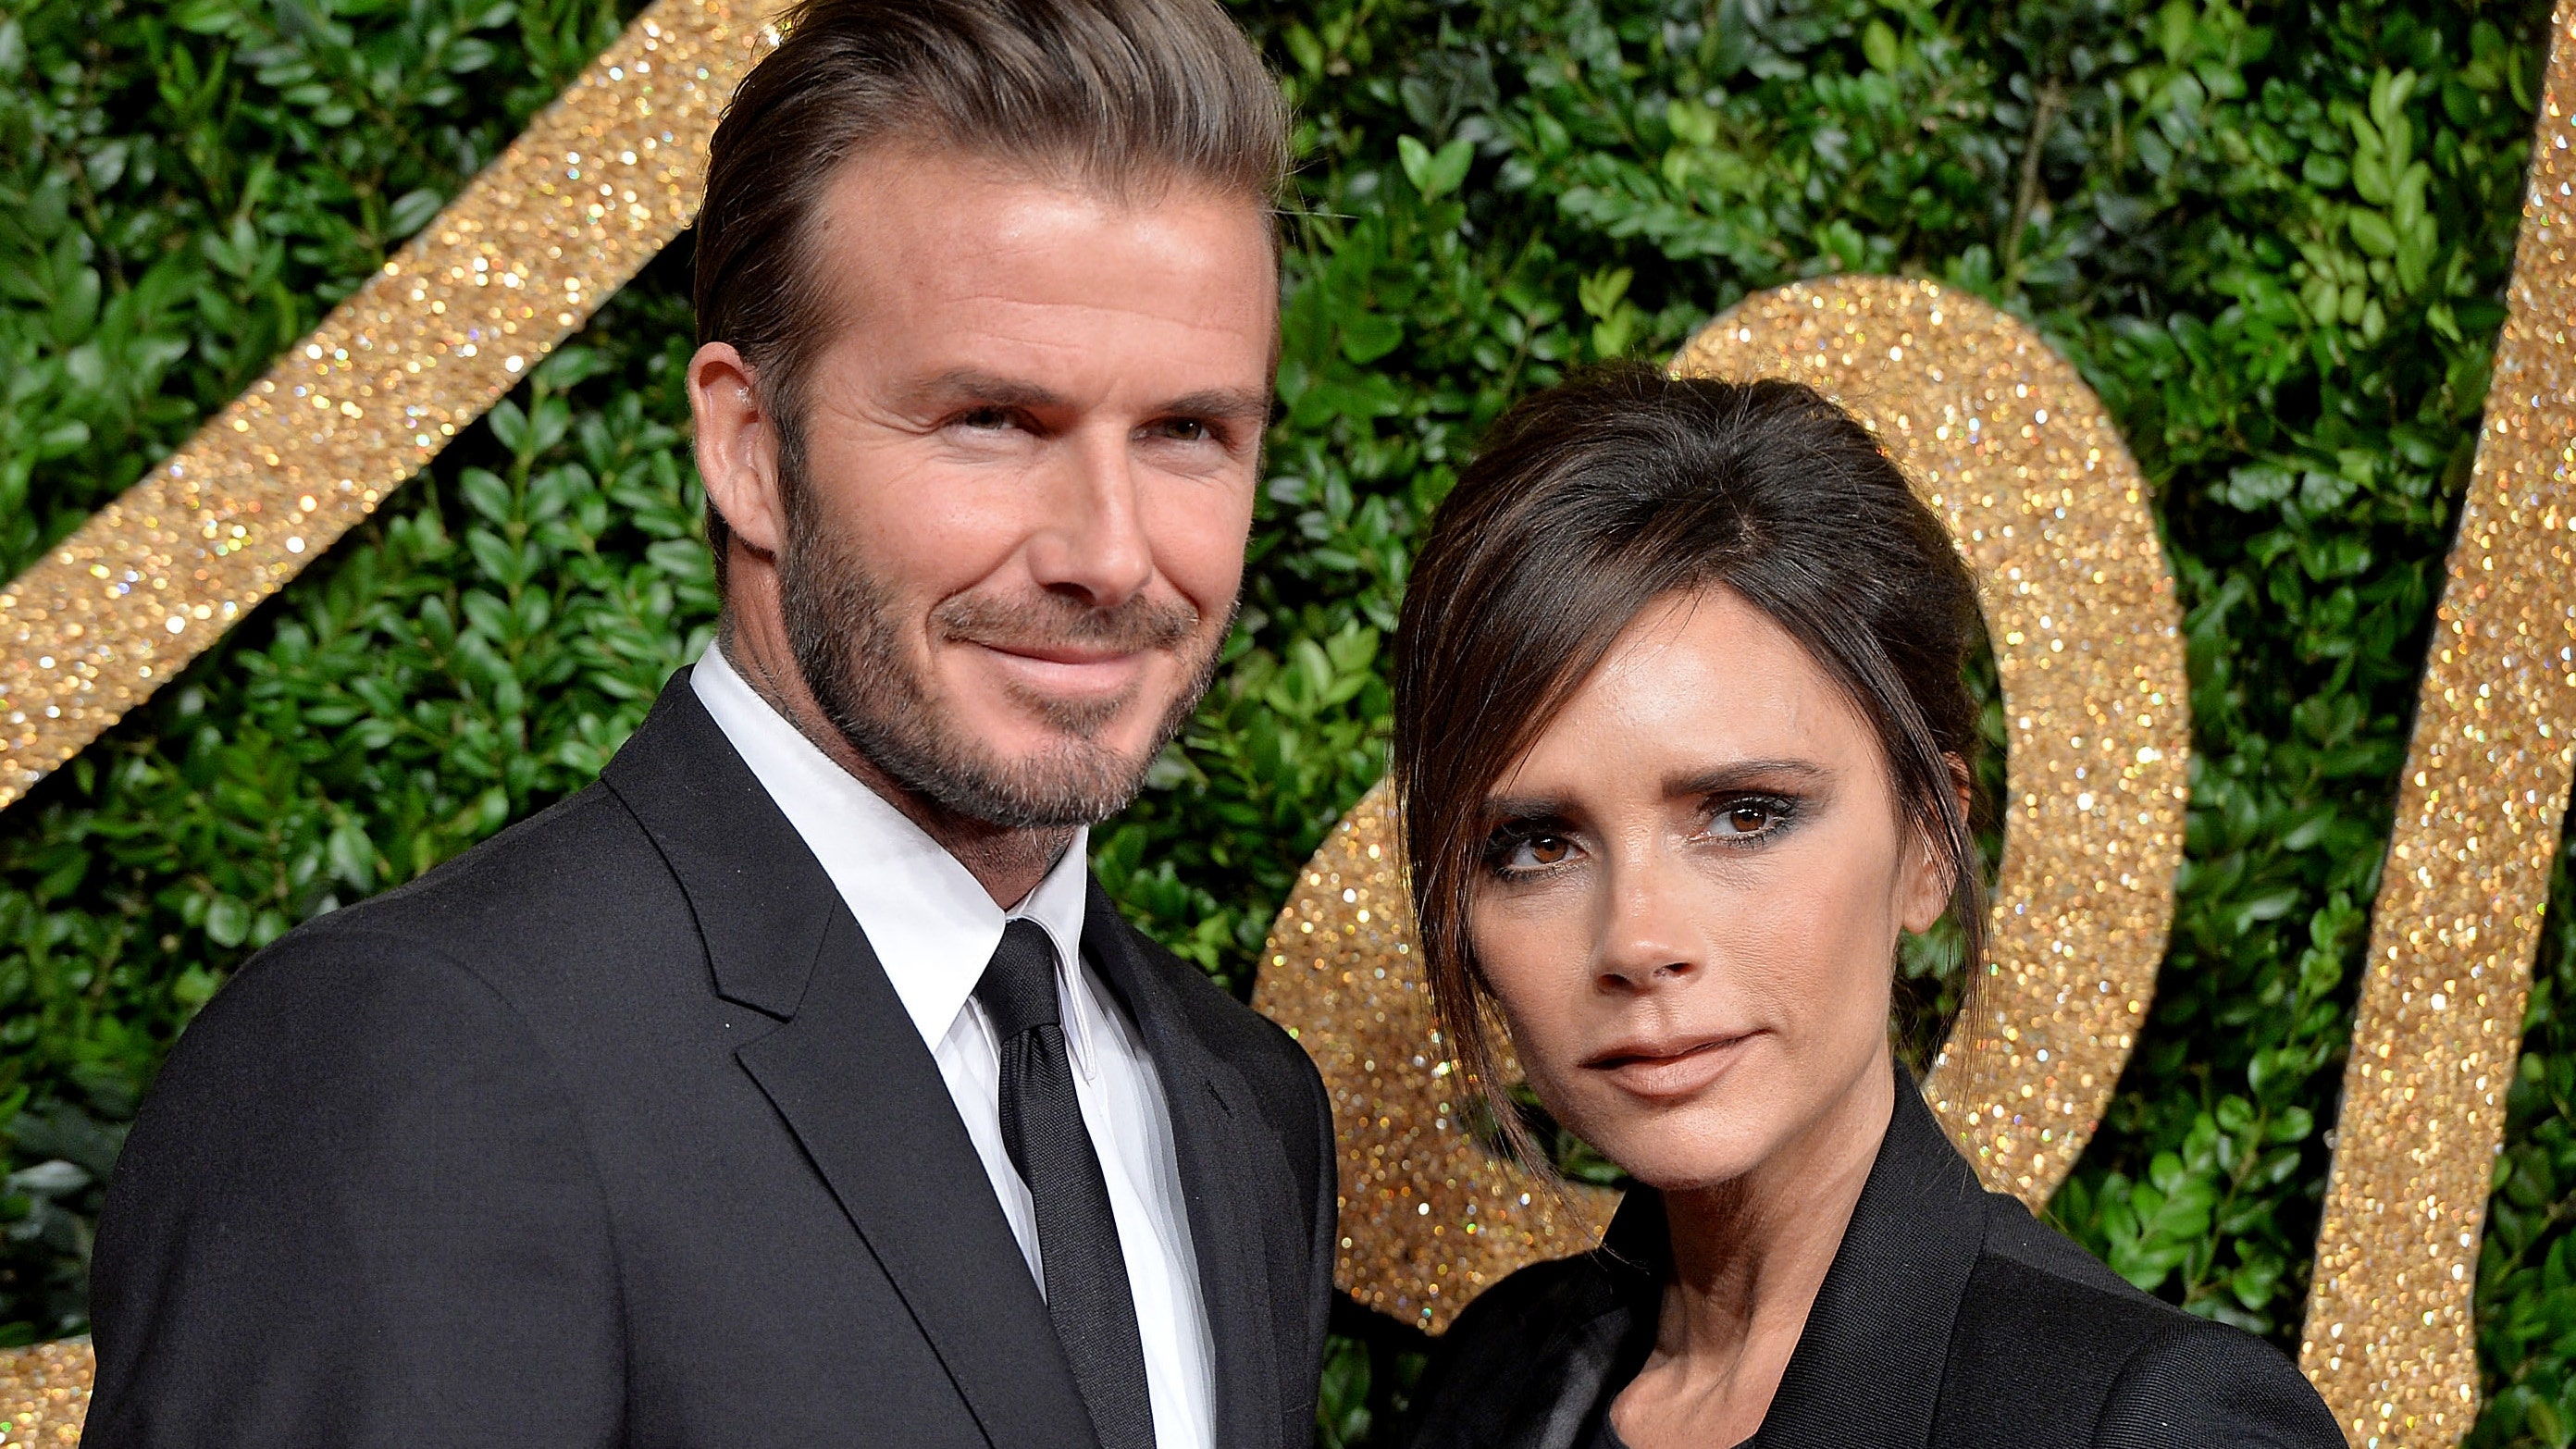 Victoria Beckham asks what to do with her ‘entire bucket full’ of her children’s lost baby teeth